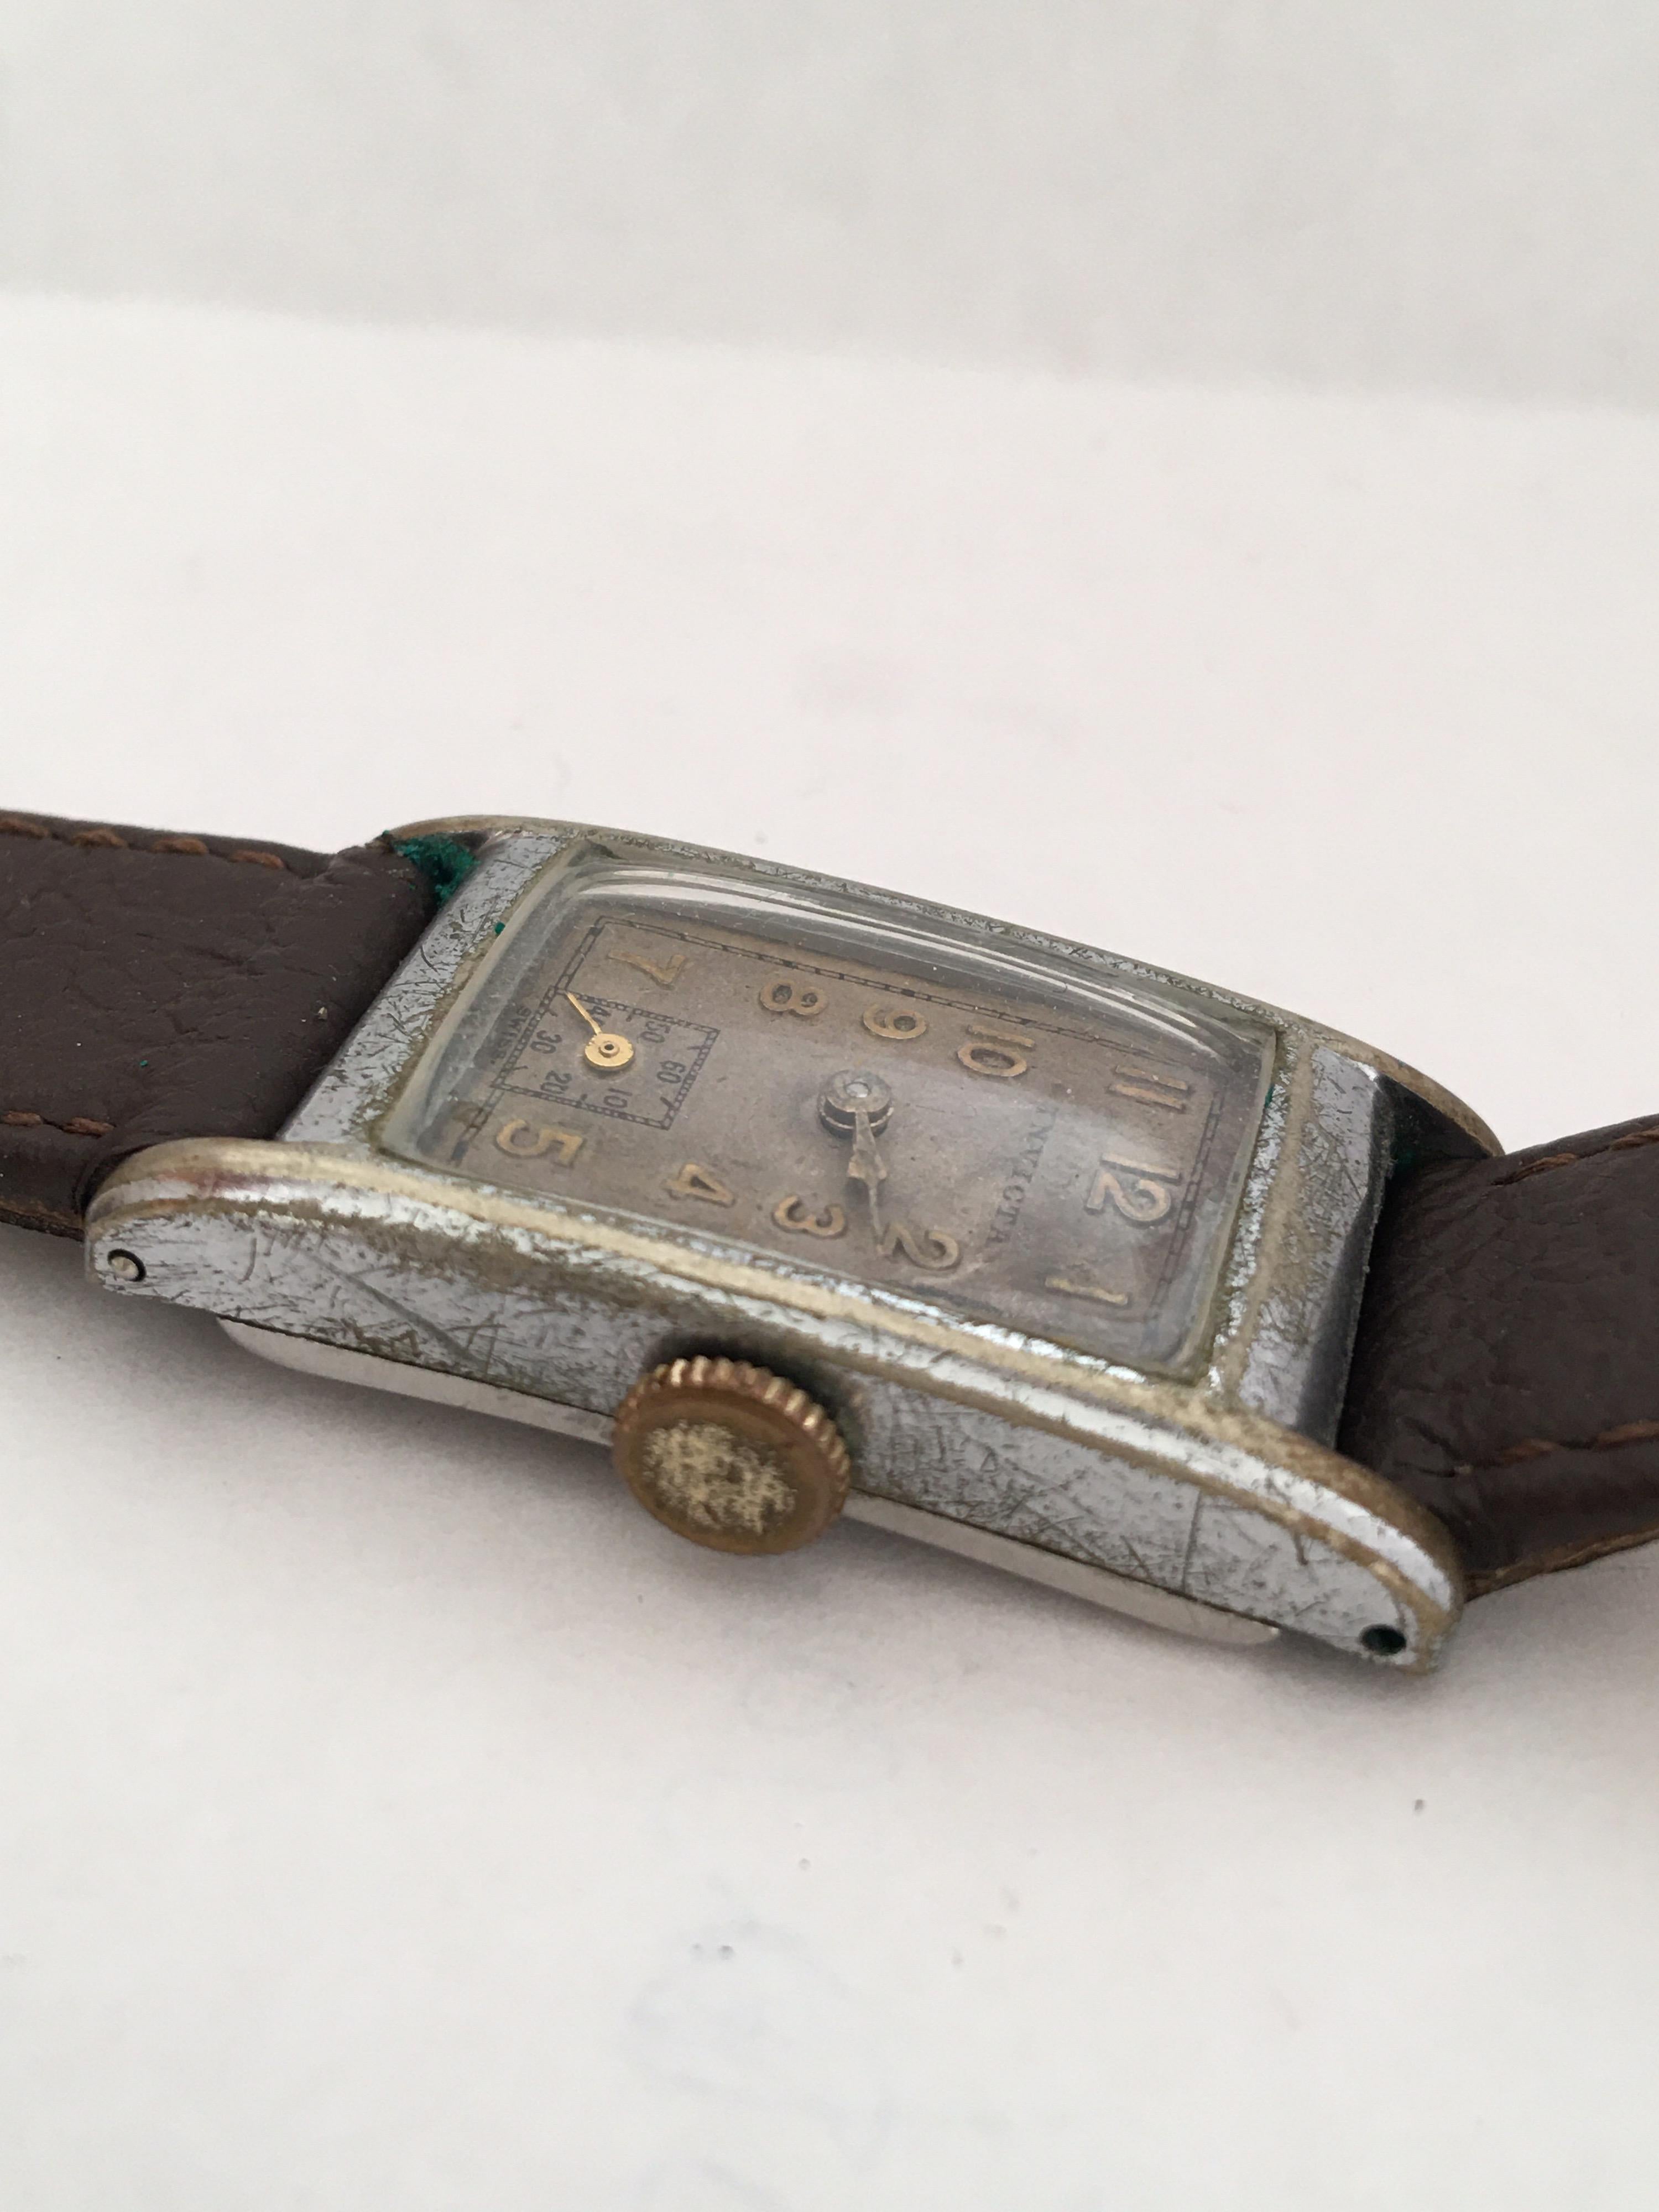 1940s Vintage Rectangular Invicta Mechanical Watch In Fair Condition For Sale In Carlisle, GB